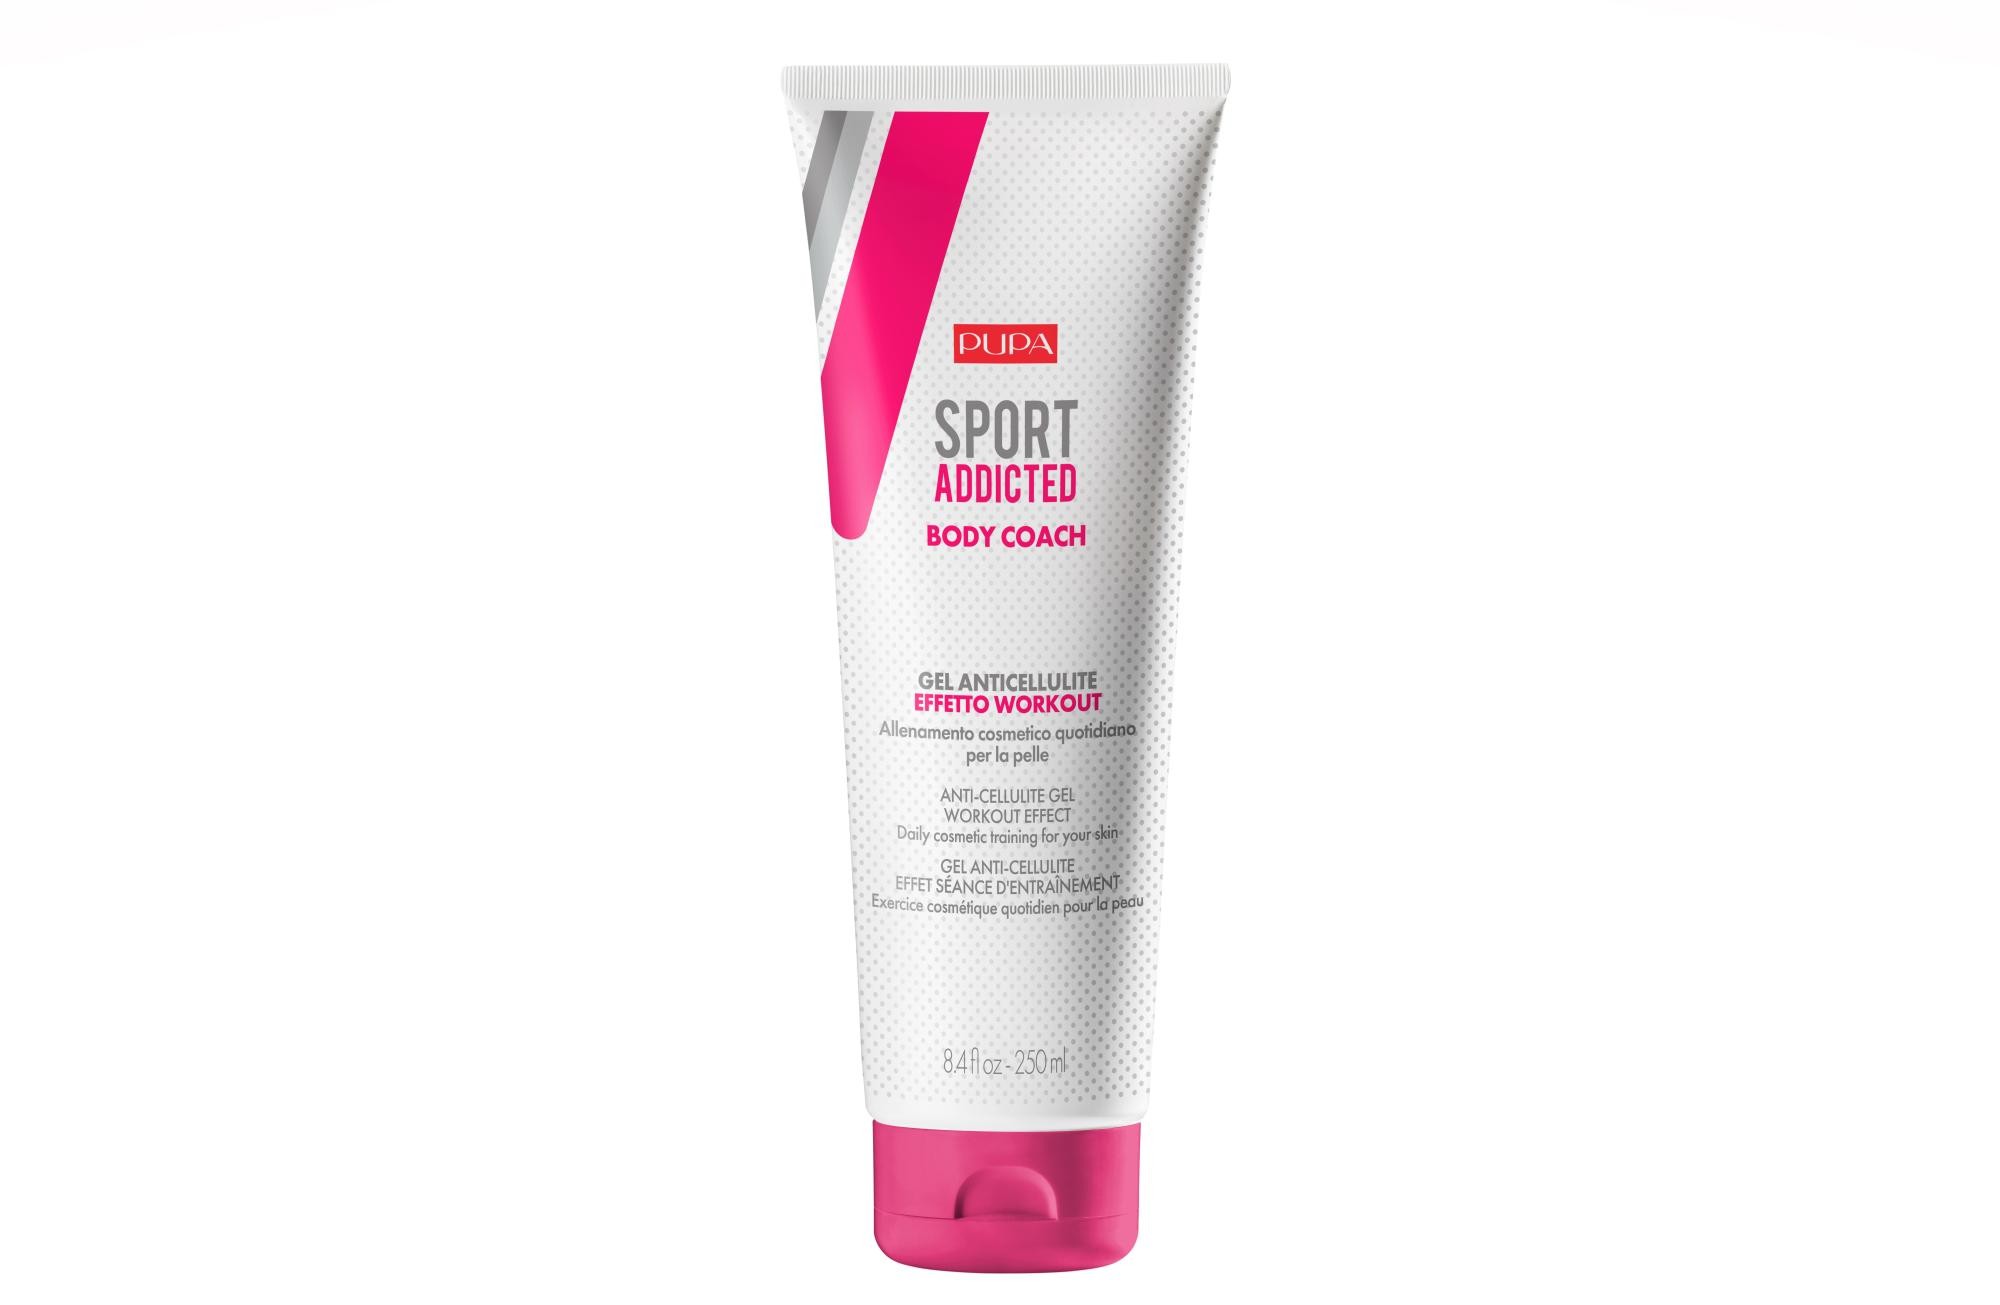 PUPA Milano Sport Addicted Body Coach - Gel Anticellulite Effetto Workout 250ml